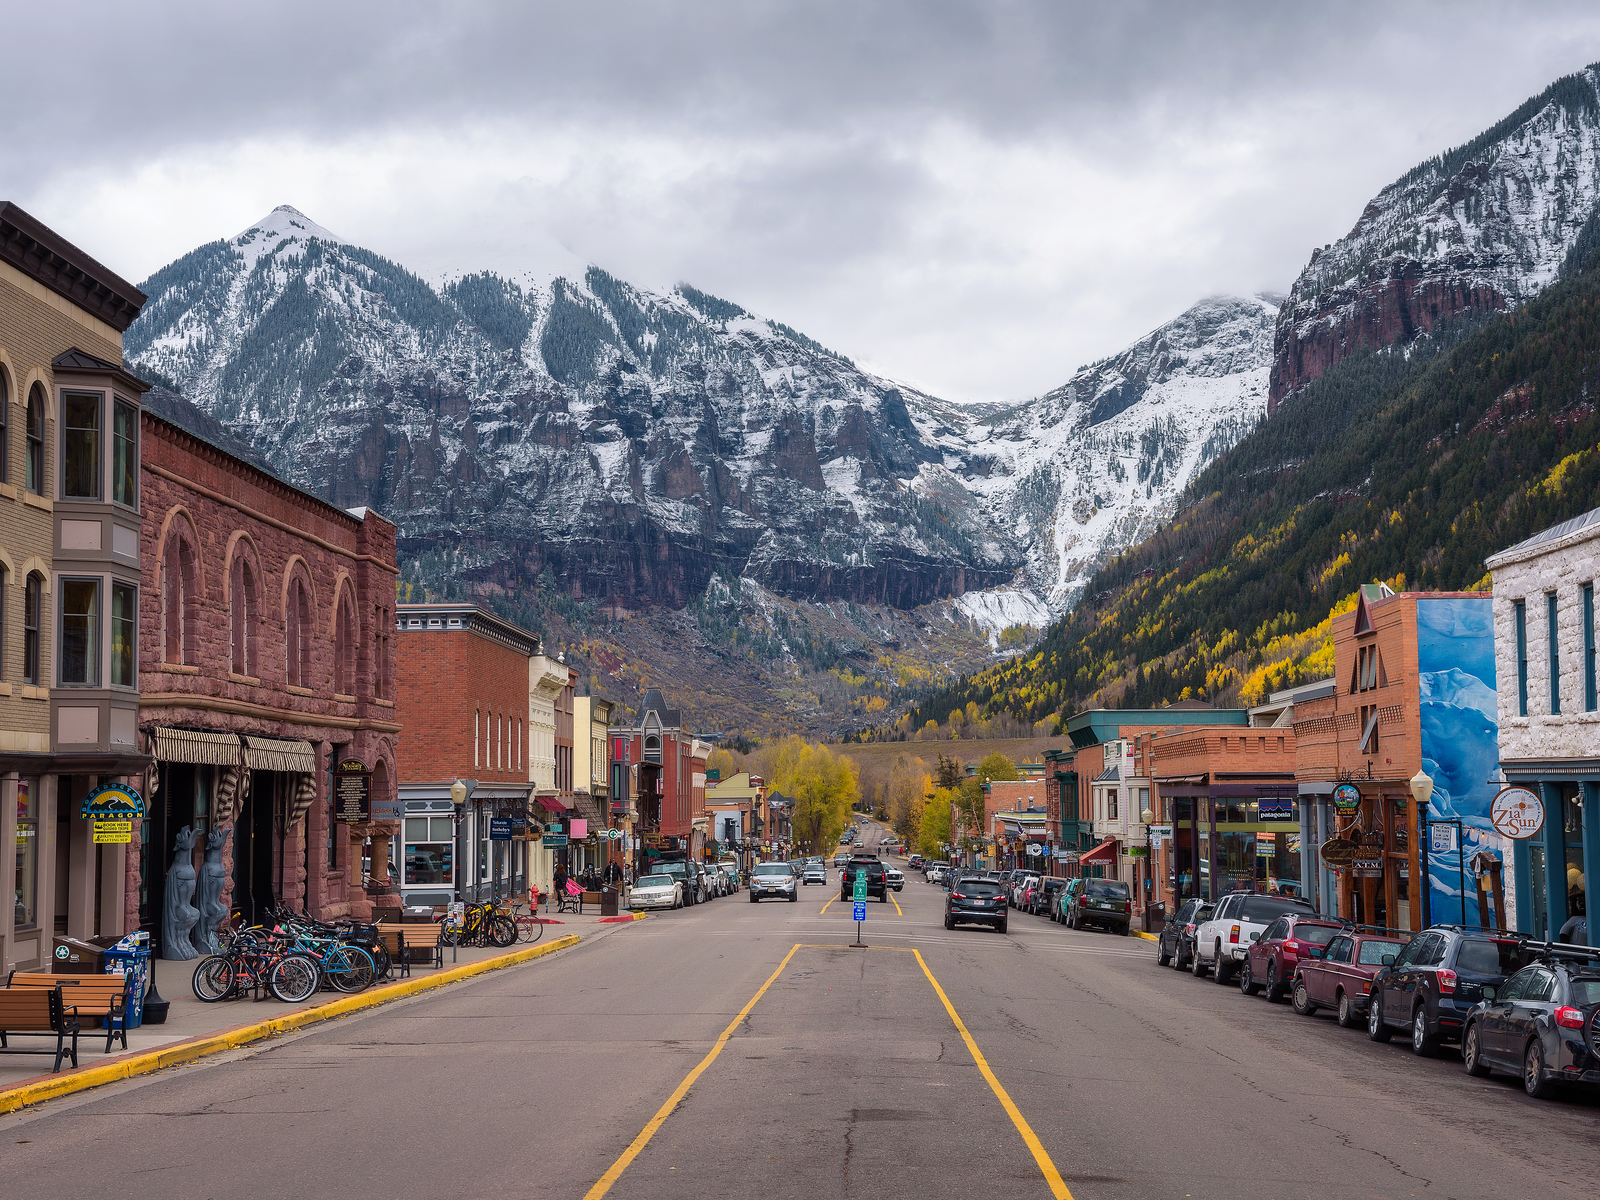 Cars parked on the street side with historic structures of Telluride, Colorado, one of the most beautiful cities in the US, at the foot of the snowy San Joan Mountains